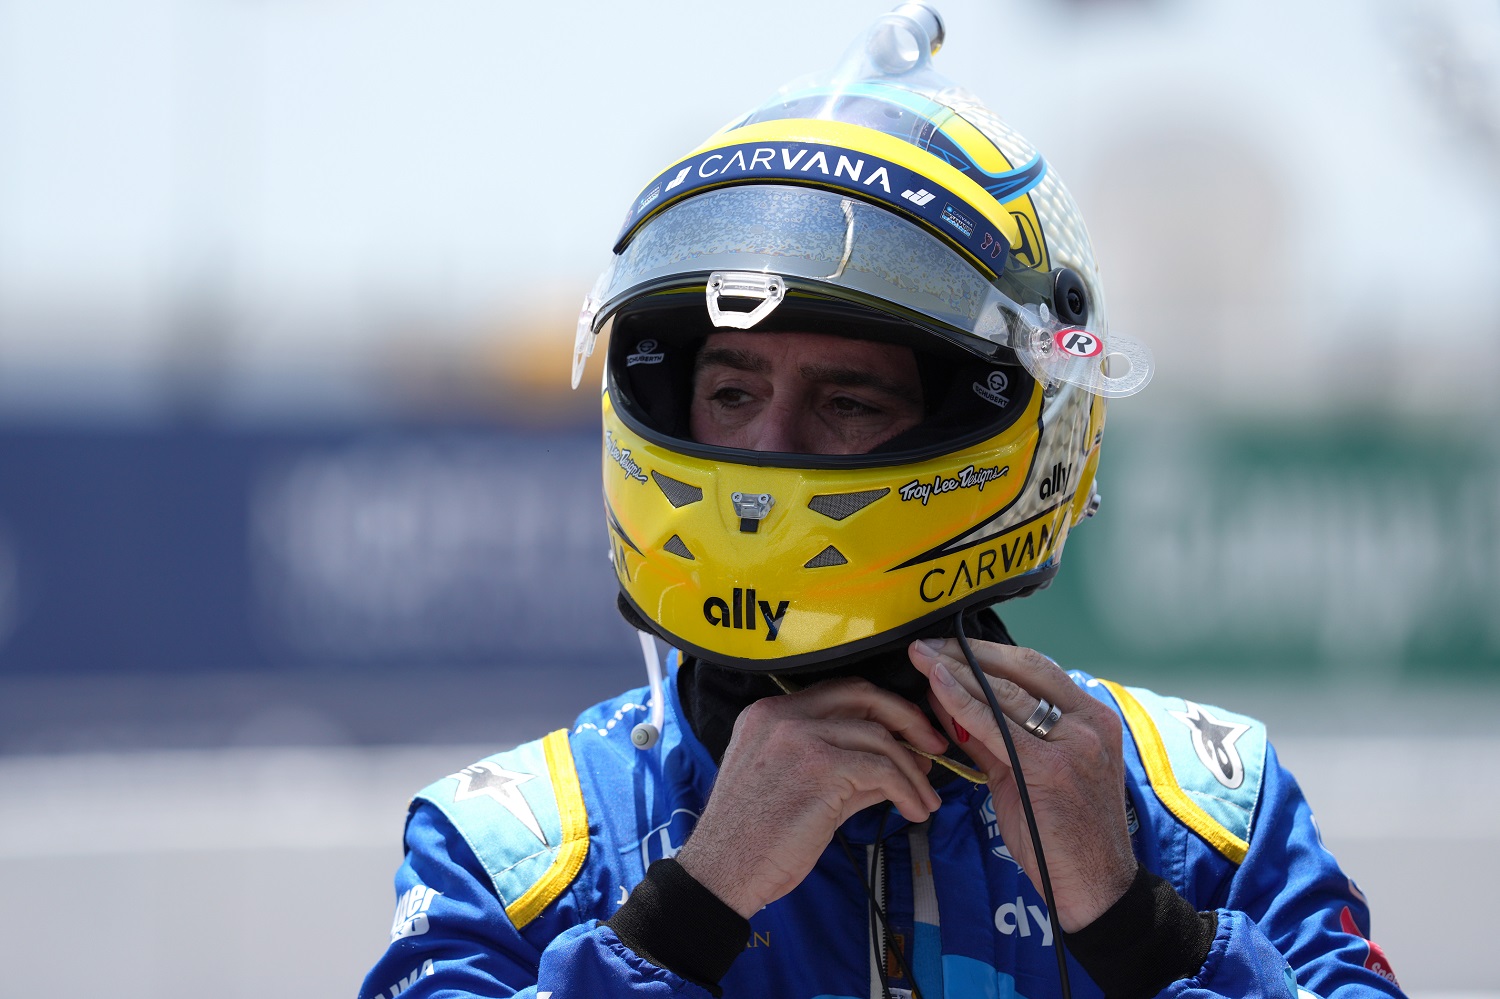 Jimmie Johnson, driver of the No. 48 Chip Ganassi Racing Honda gets ready to qualify for the NTT IndyCar Series Firestone Grand Prix of St. Petersburg on April 24, 2021. | Mark Brown/Getty Images